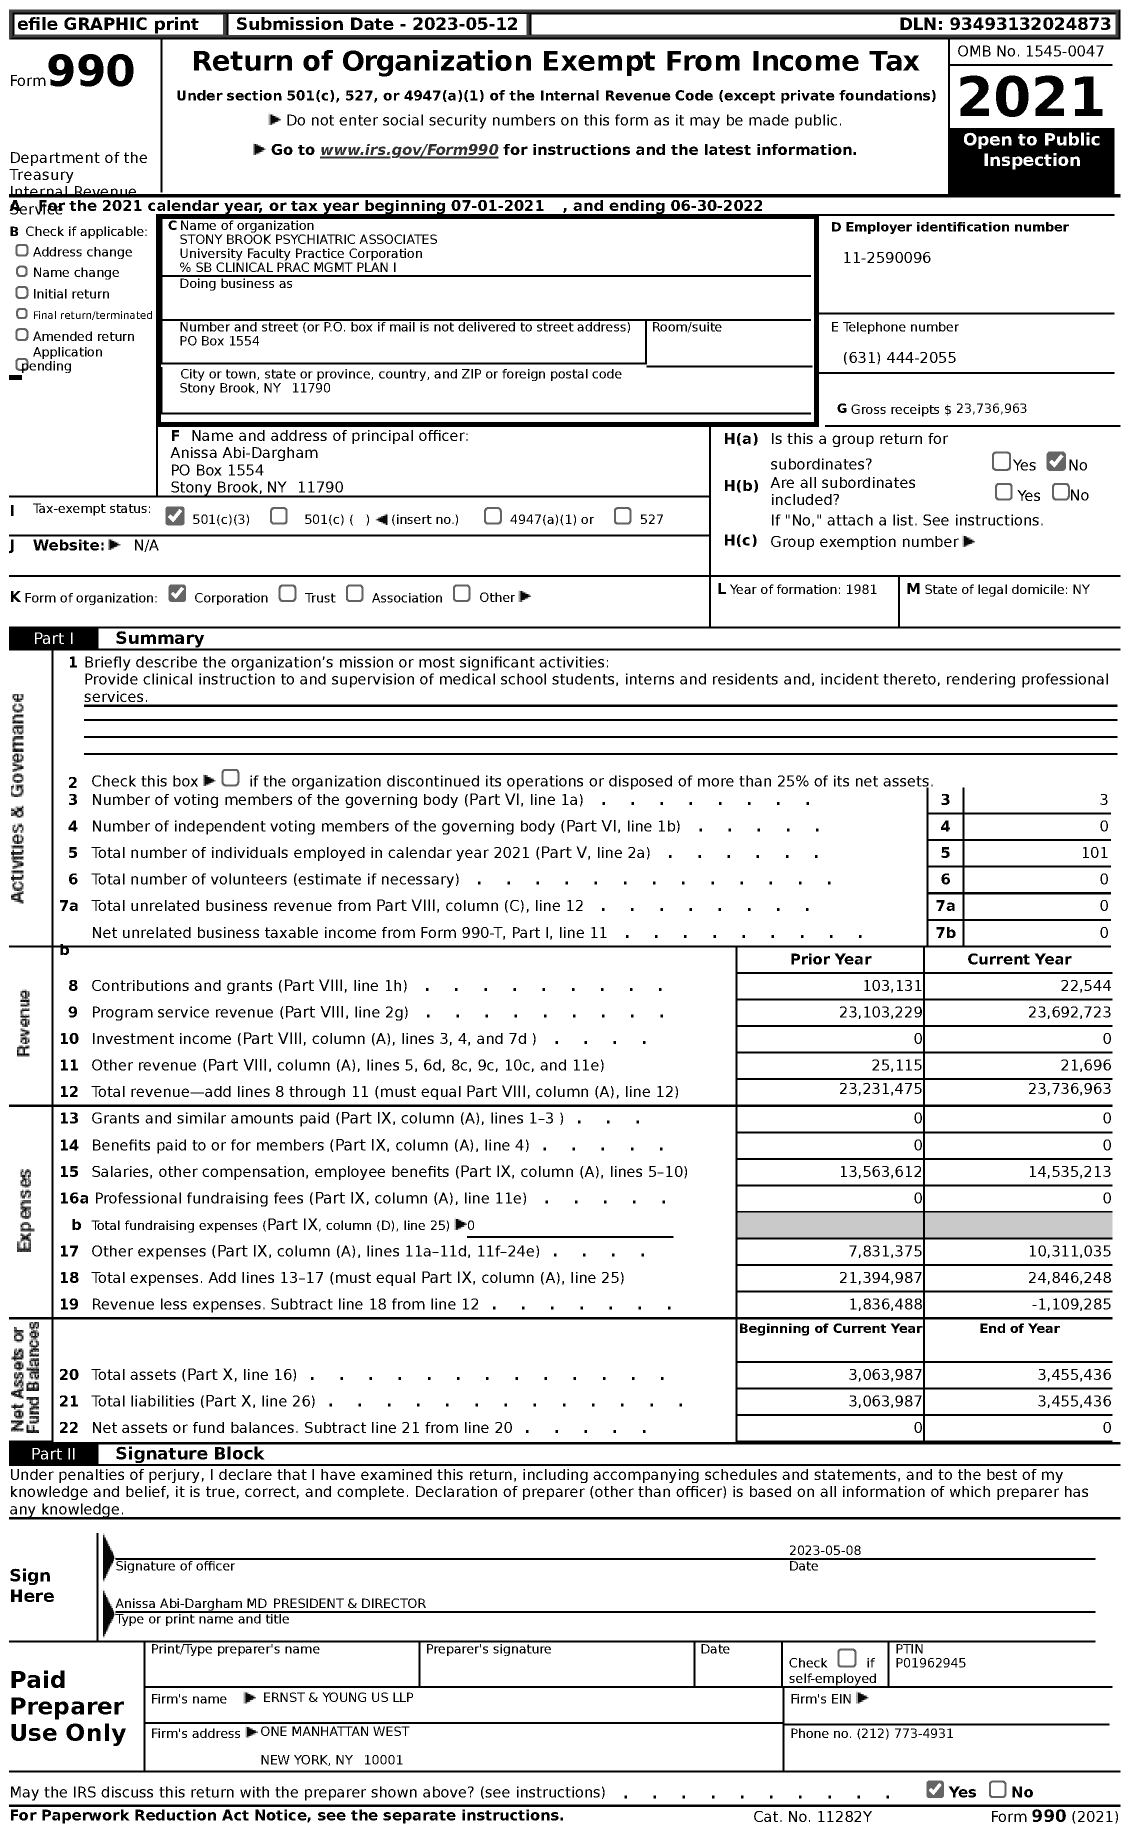 Image of first page of 2021 Form 990 for STONY BROOK PSYCHIATRIC ASSOCIATES University Faculty Practice Corporation